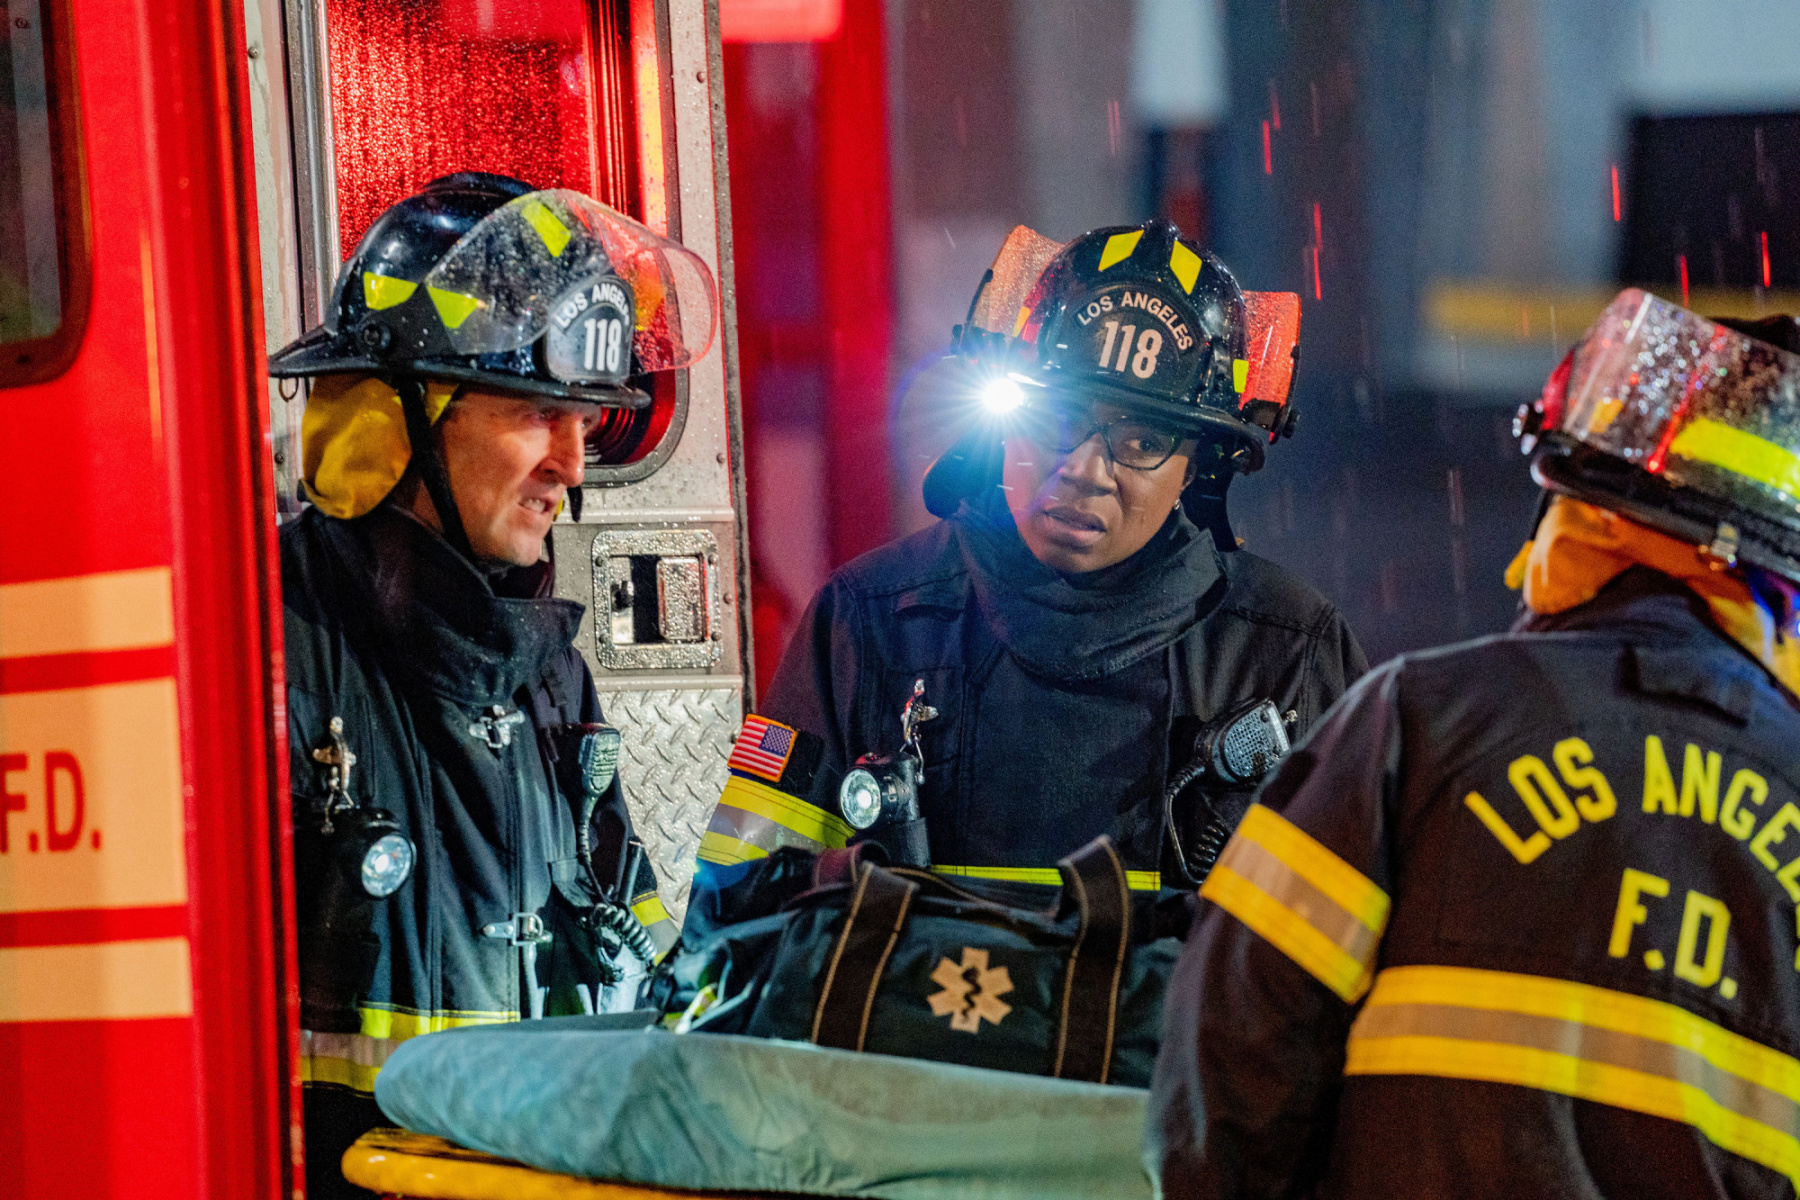 9-1-1: Aisha Hinds (Center) in the “In a Flash” episode of 9-1-1 airing Monday, March 6 (8:00-9:01 PM ET/PT) on FOX. © 2022 FOX MEDIA LLC. CR: Jack Zeman/ FOX.